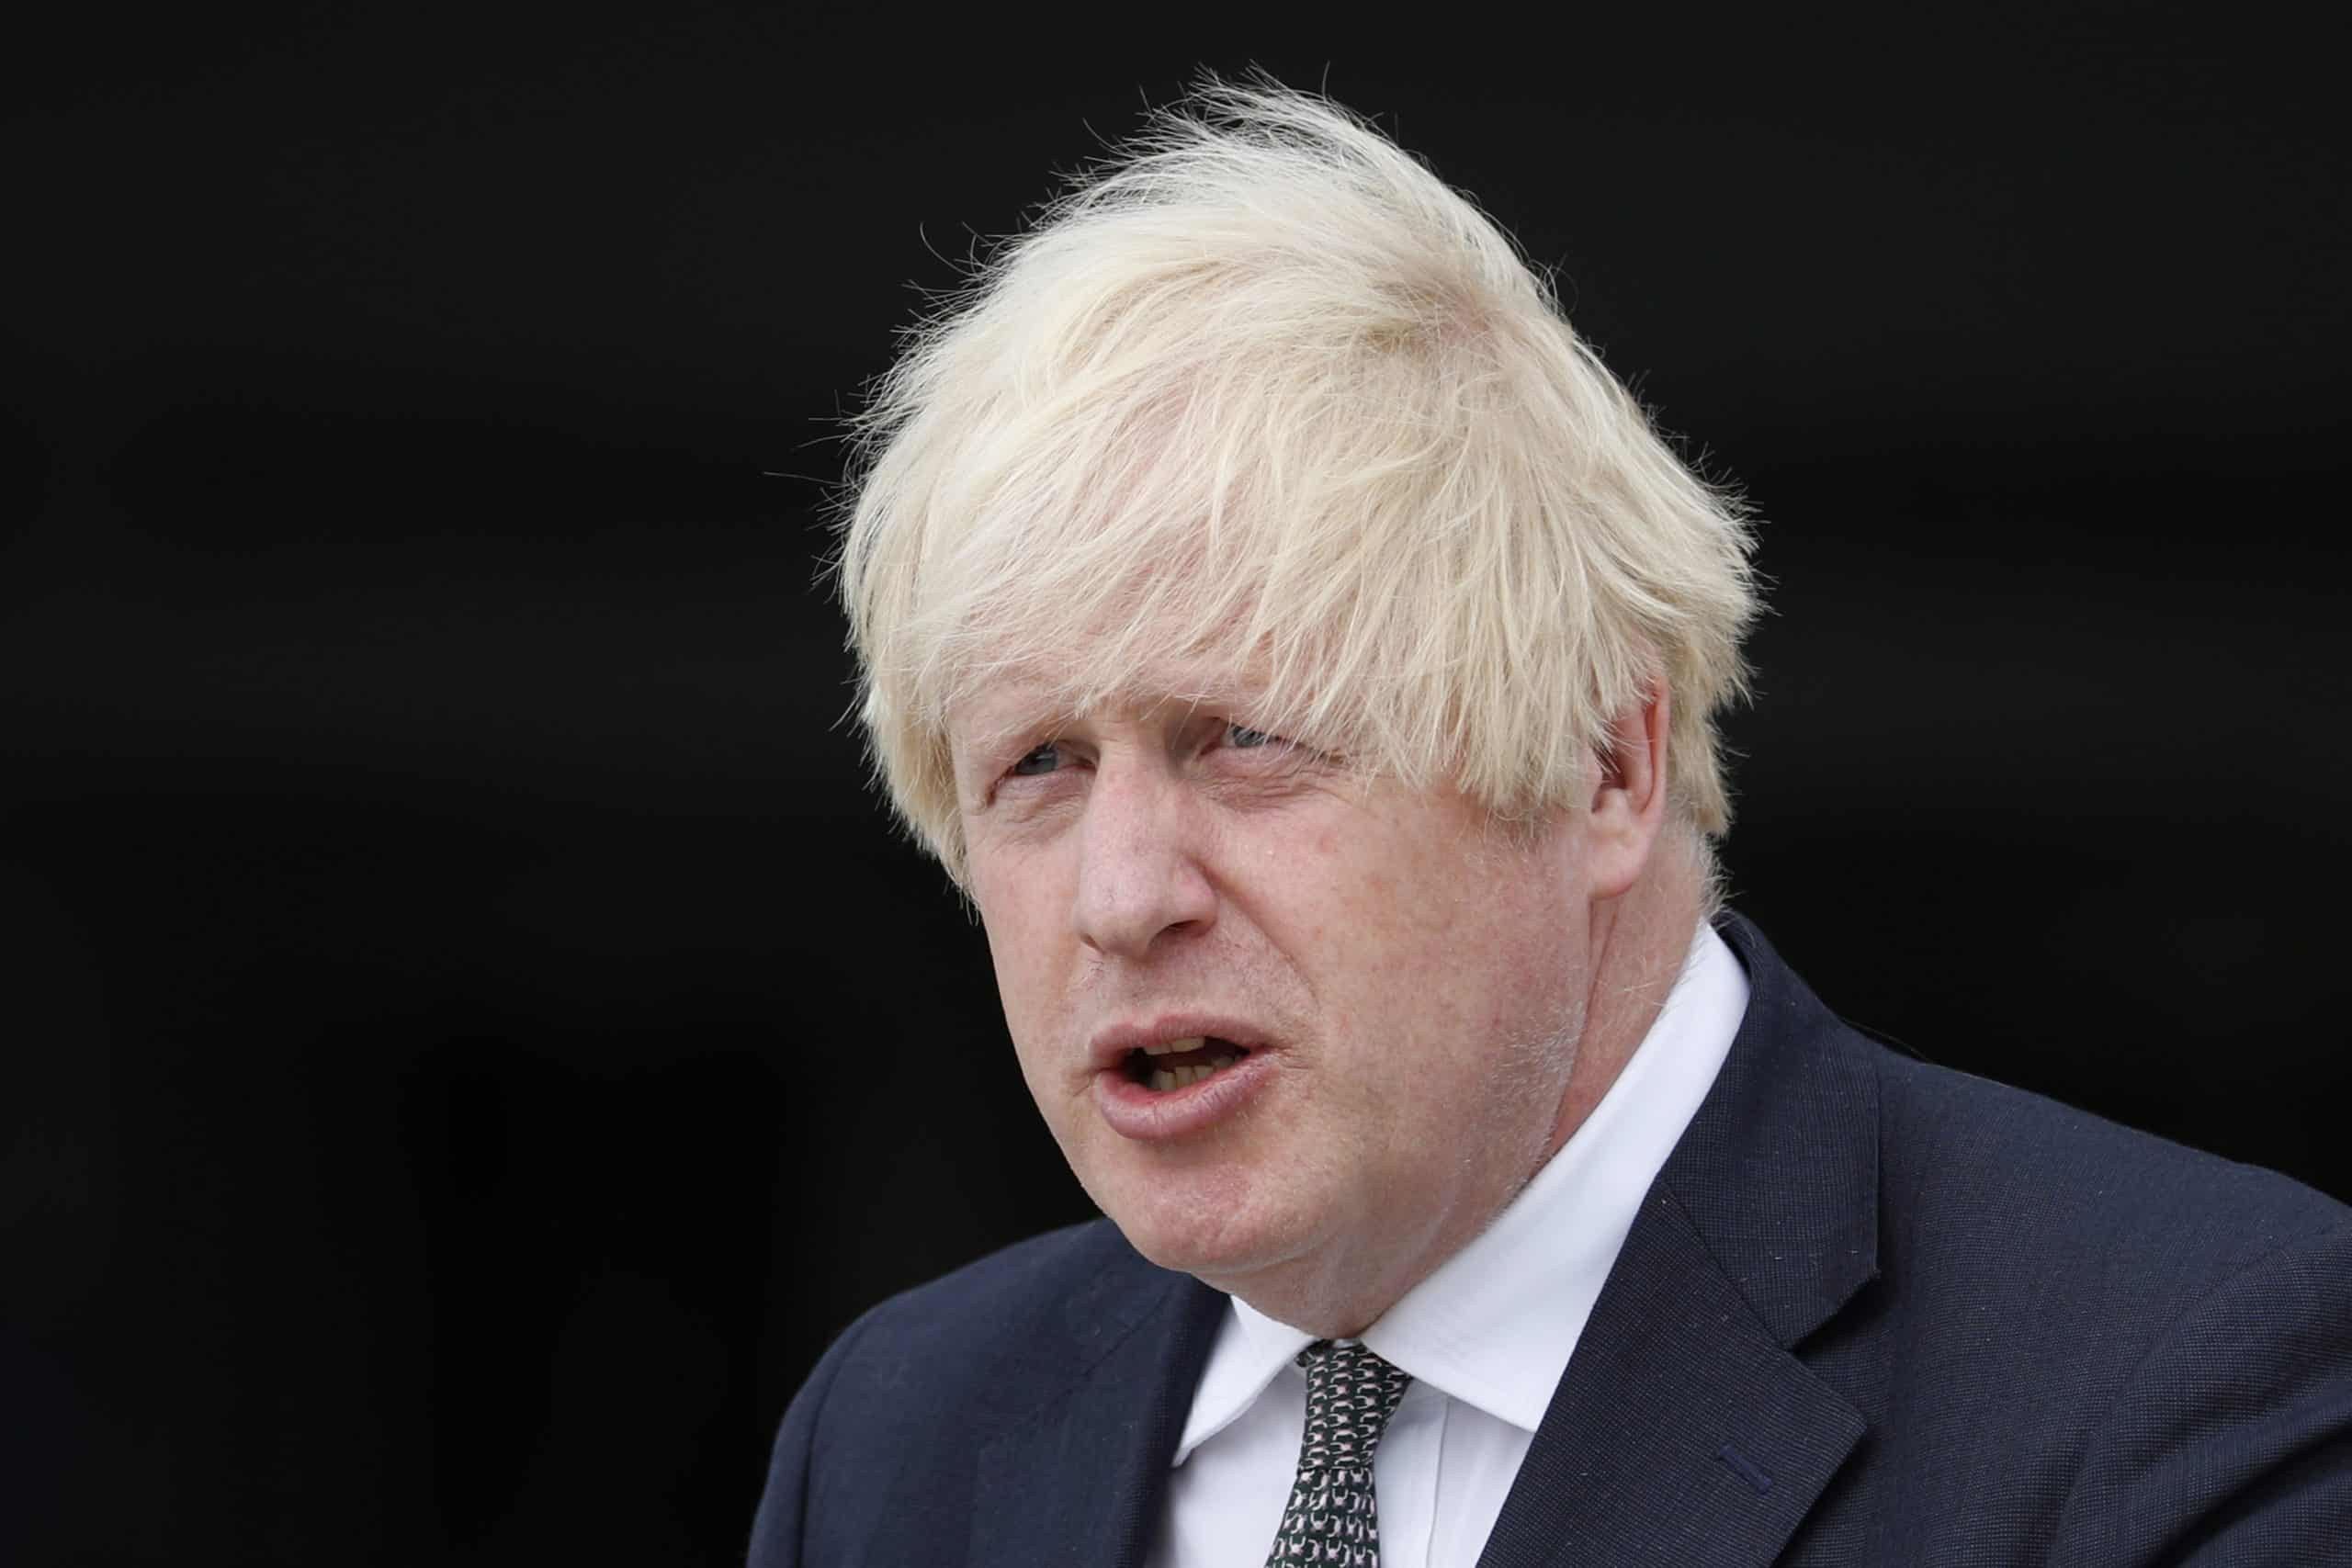 ‘Clean the stables’: Johnson faces calls for urgent sleaze inquiry